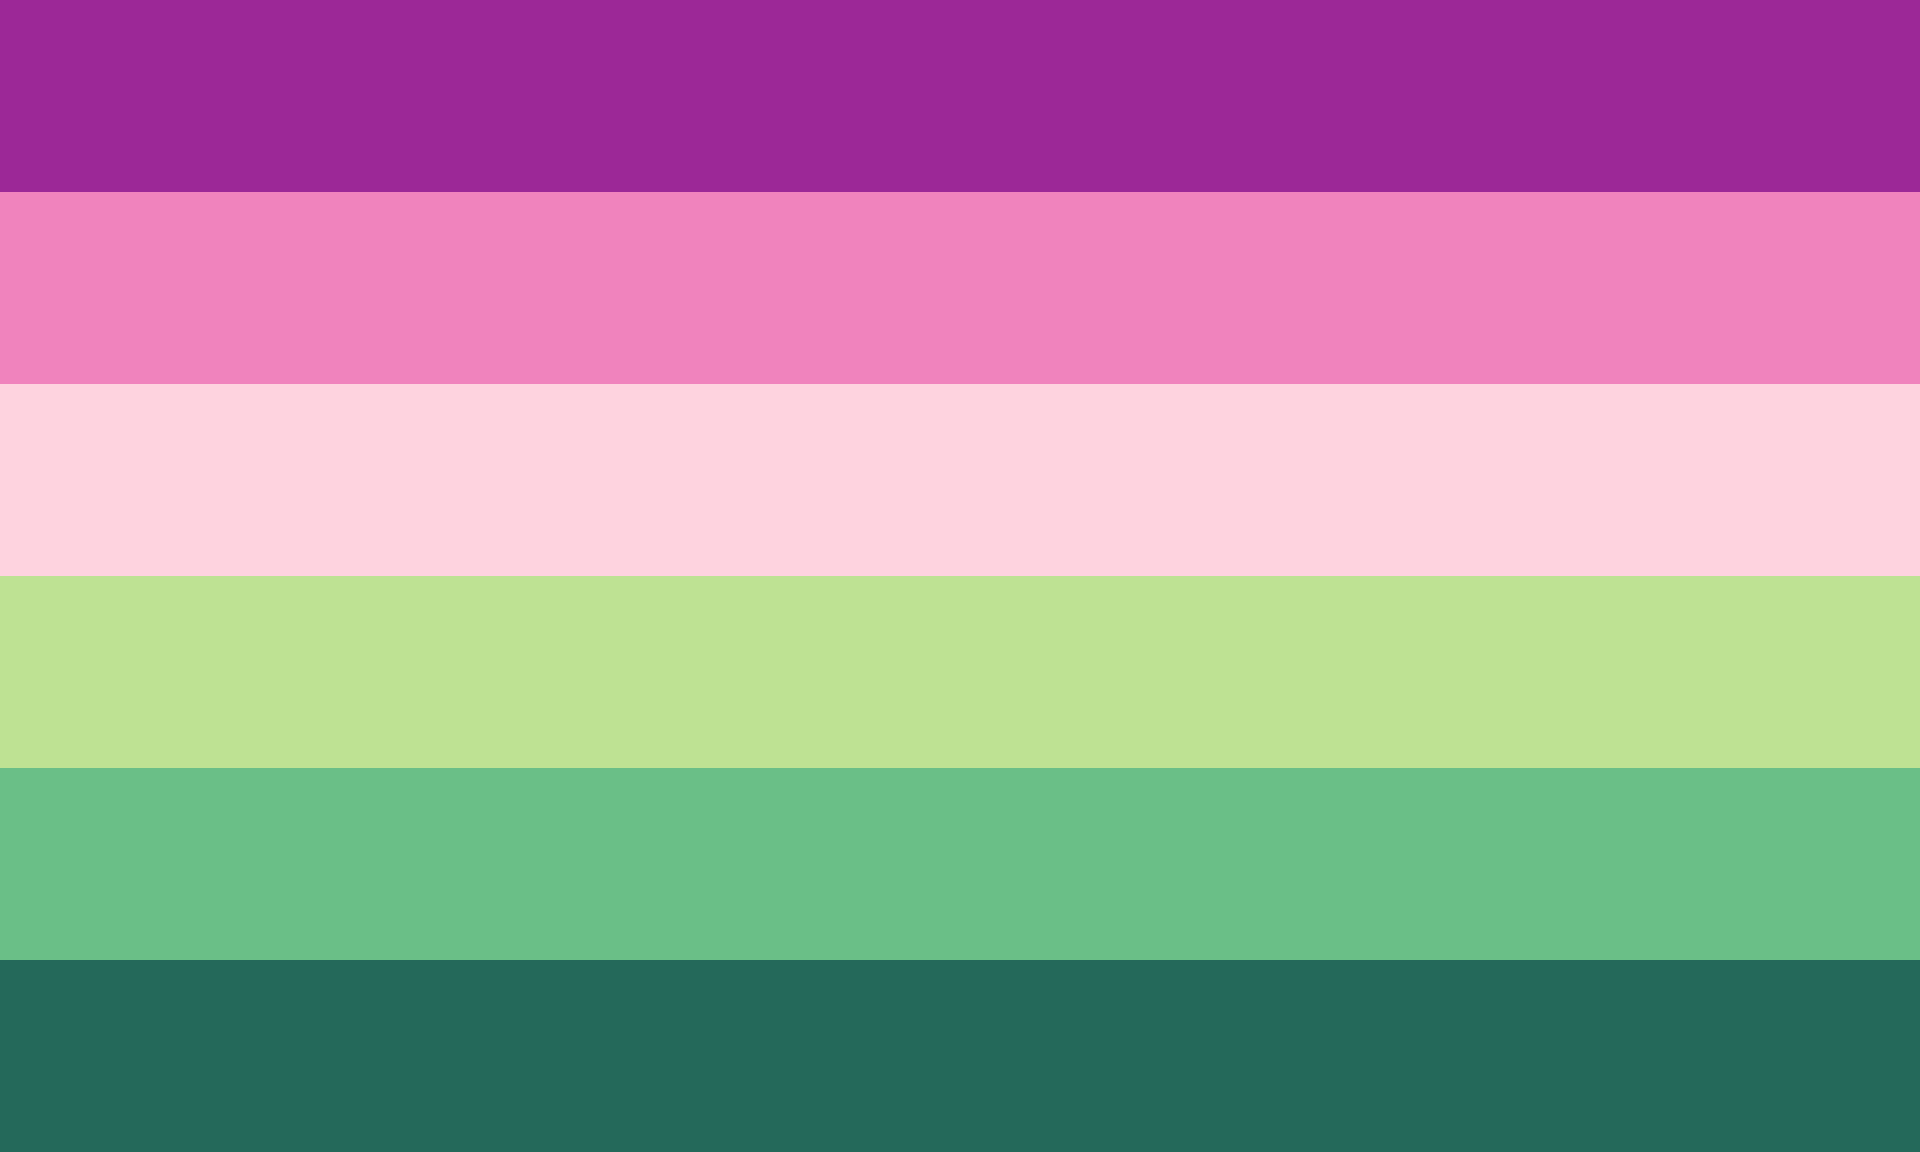 Pretty Sure This Has Been Done Anyways, New Bi Flag! , 56% OFF